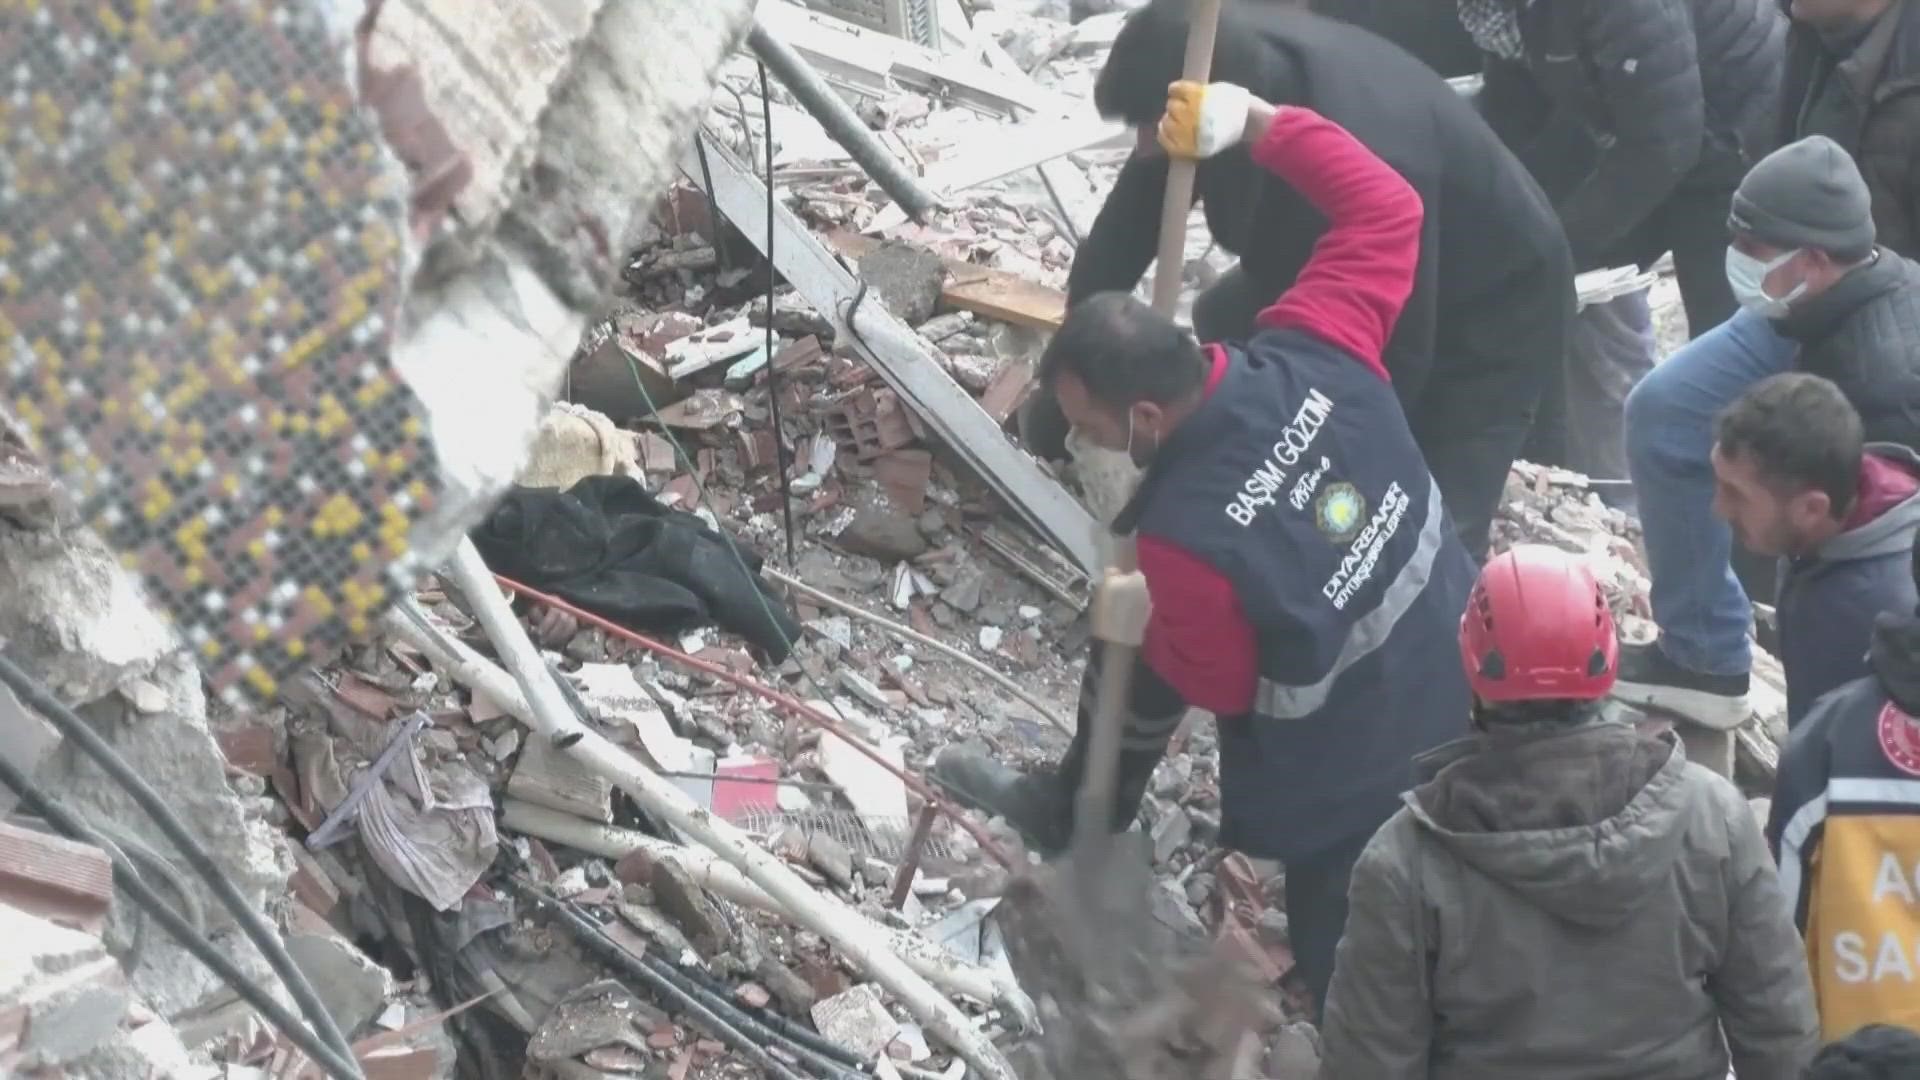 3,800 have so far been confirmed dead after a 7.8 magnitude earthquake hit Turkey and Syria.